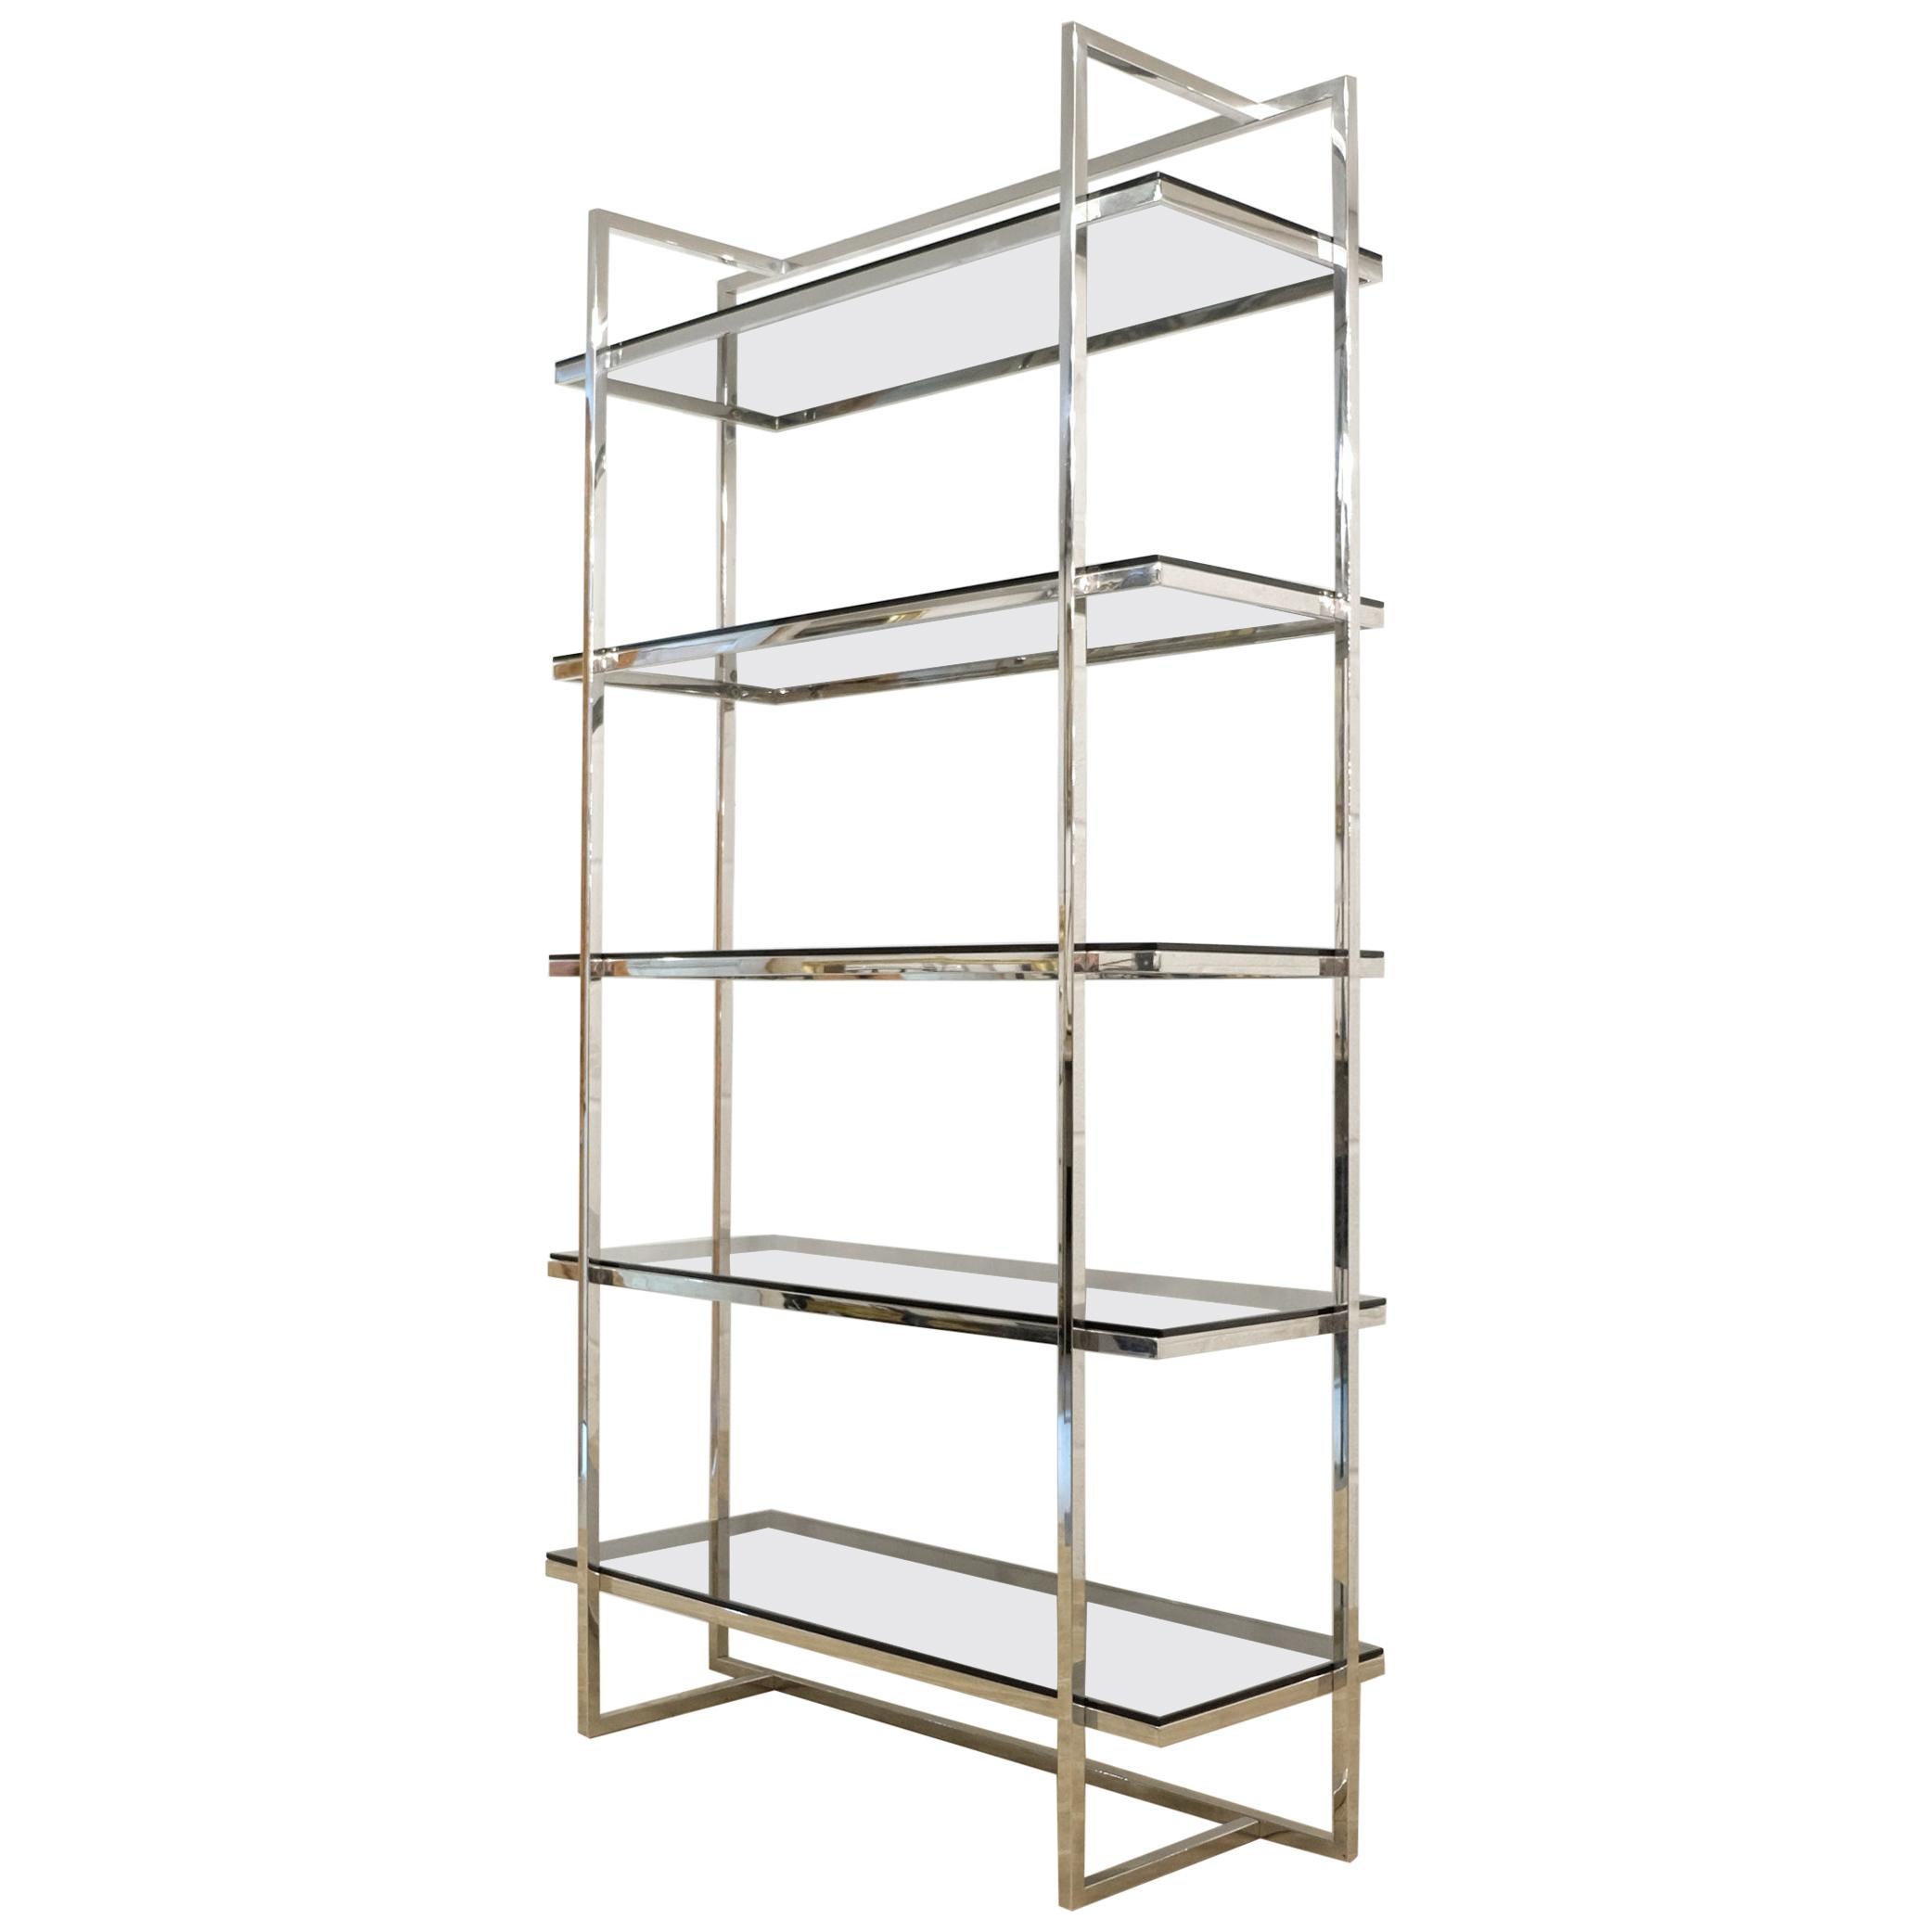 Mid-20th Century Chrome and Smoked Glass Shelving Unit, Storage, 1970s